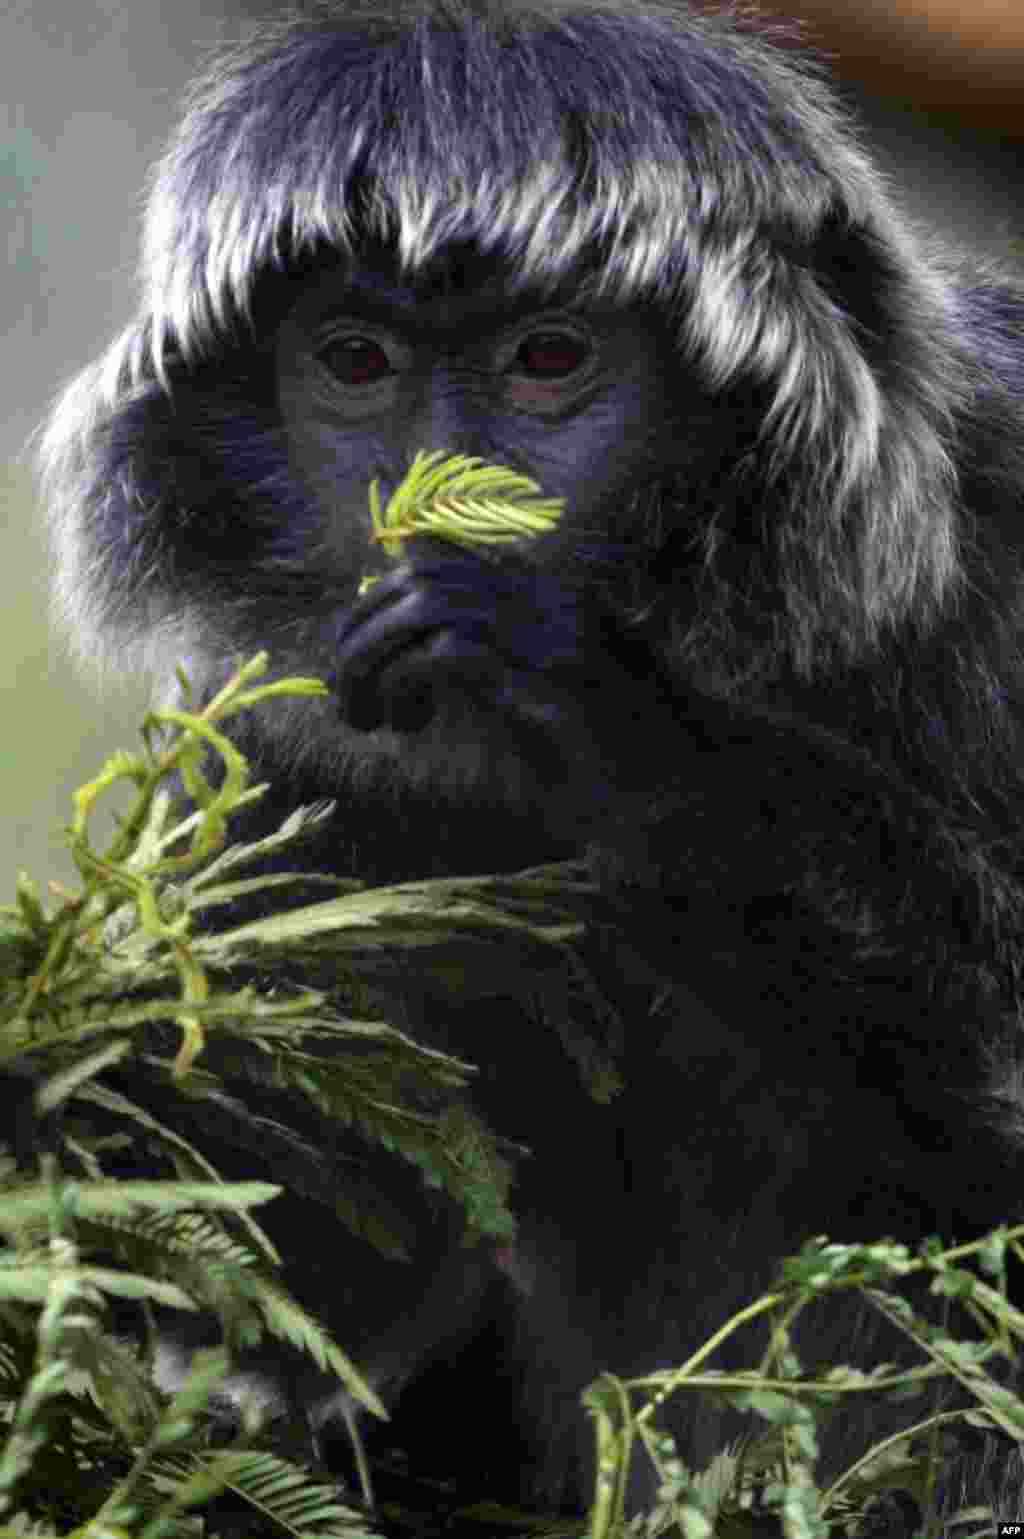 A rare Javan langur eats leaves upon arrival at a quarantine area of Javan Langur Center outside Malang, in eastern Java island, Indonesia, to aclimatize in preparation for release into a natural habitat in two months.